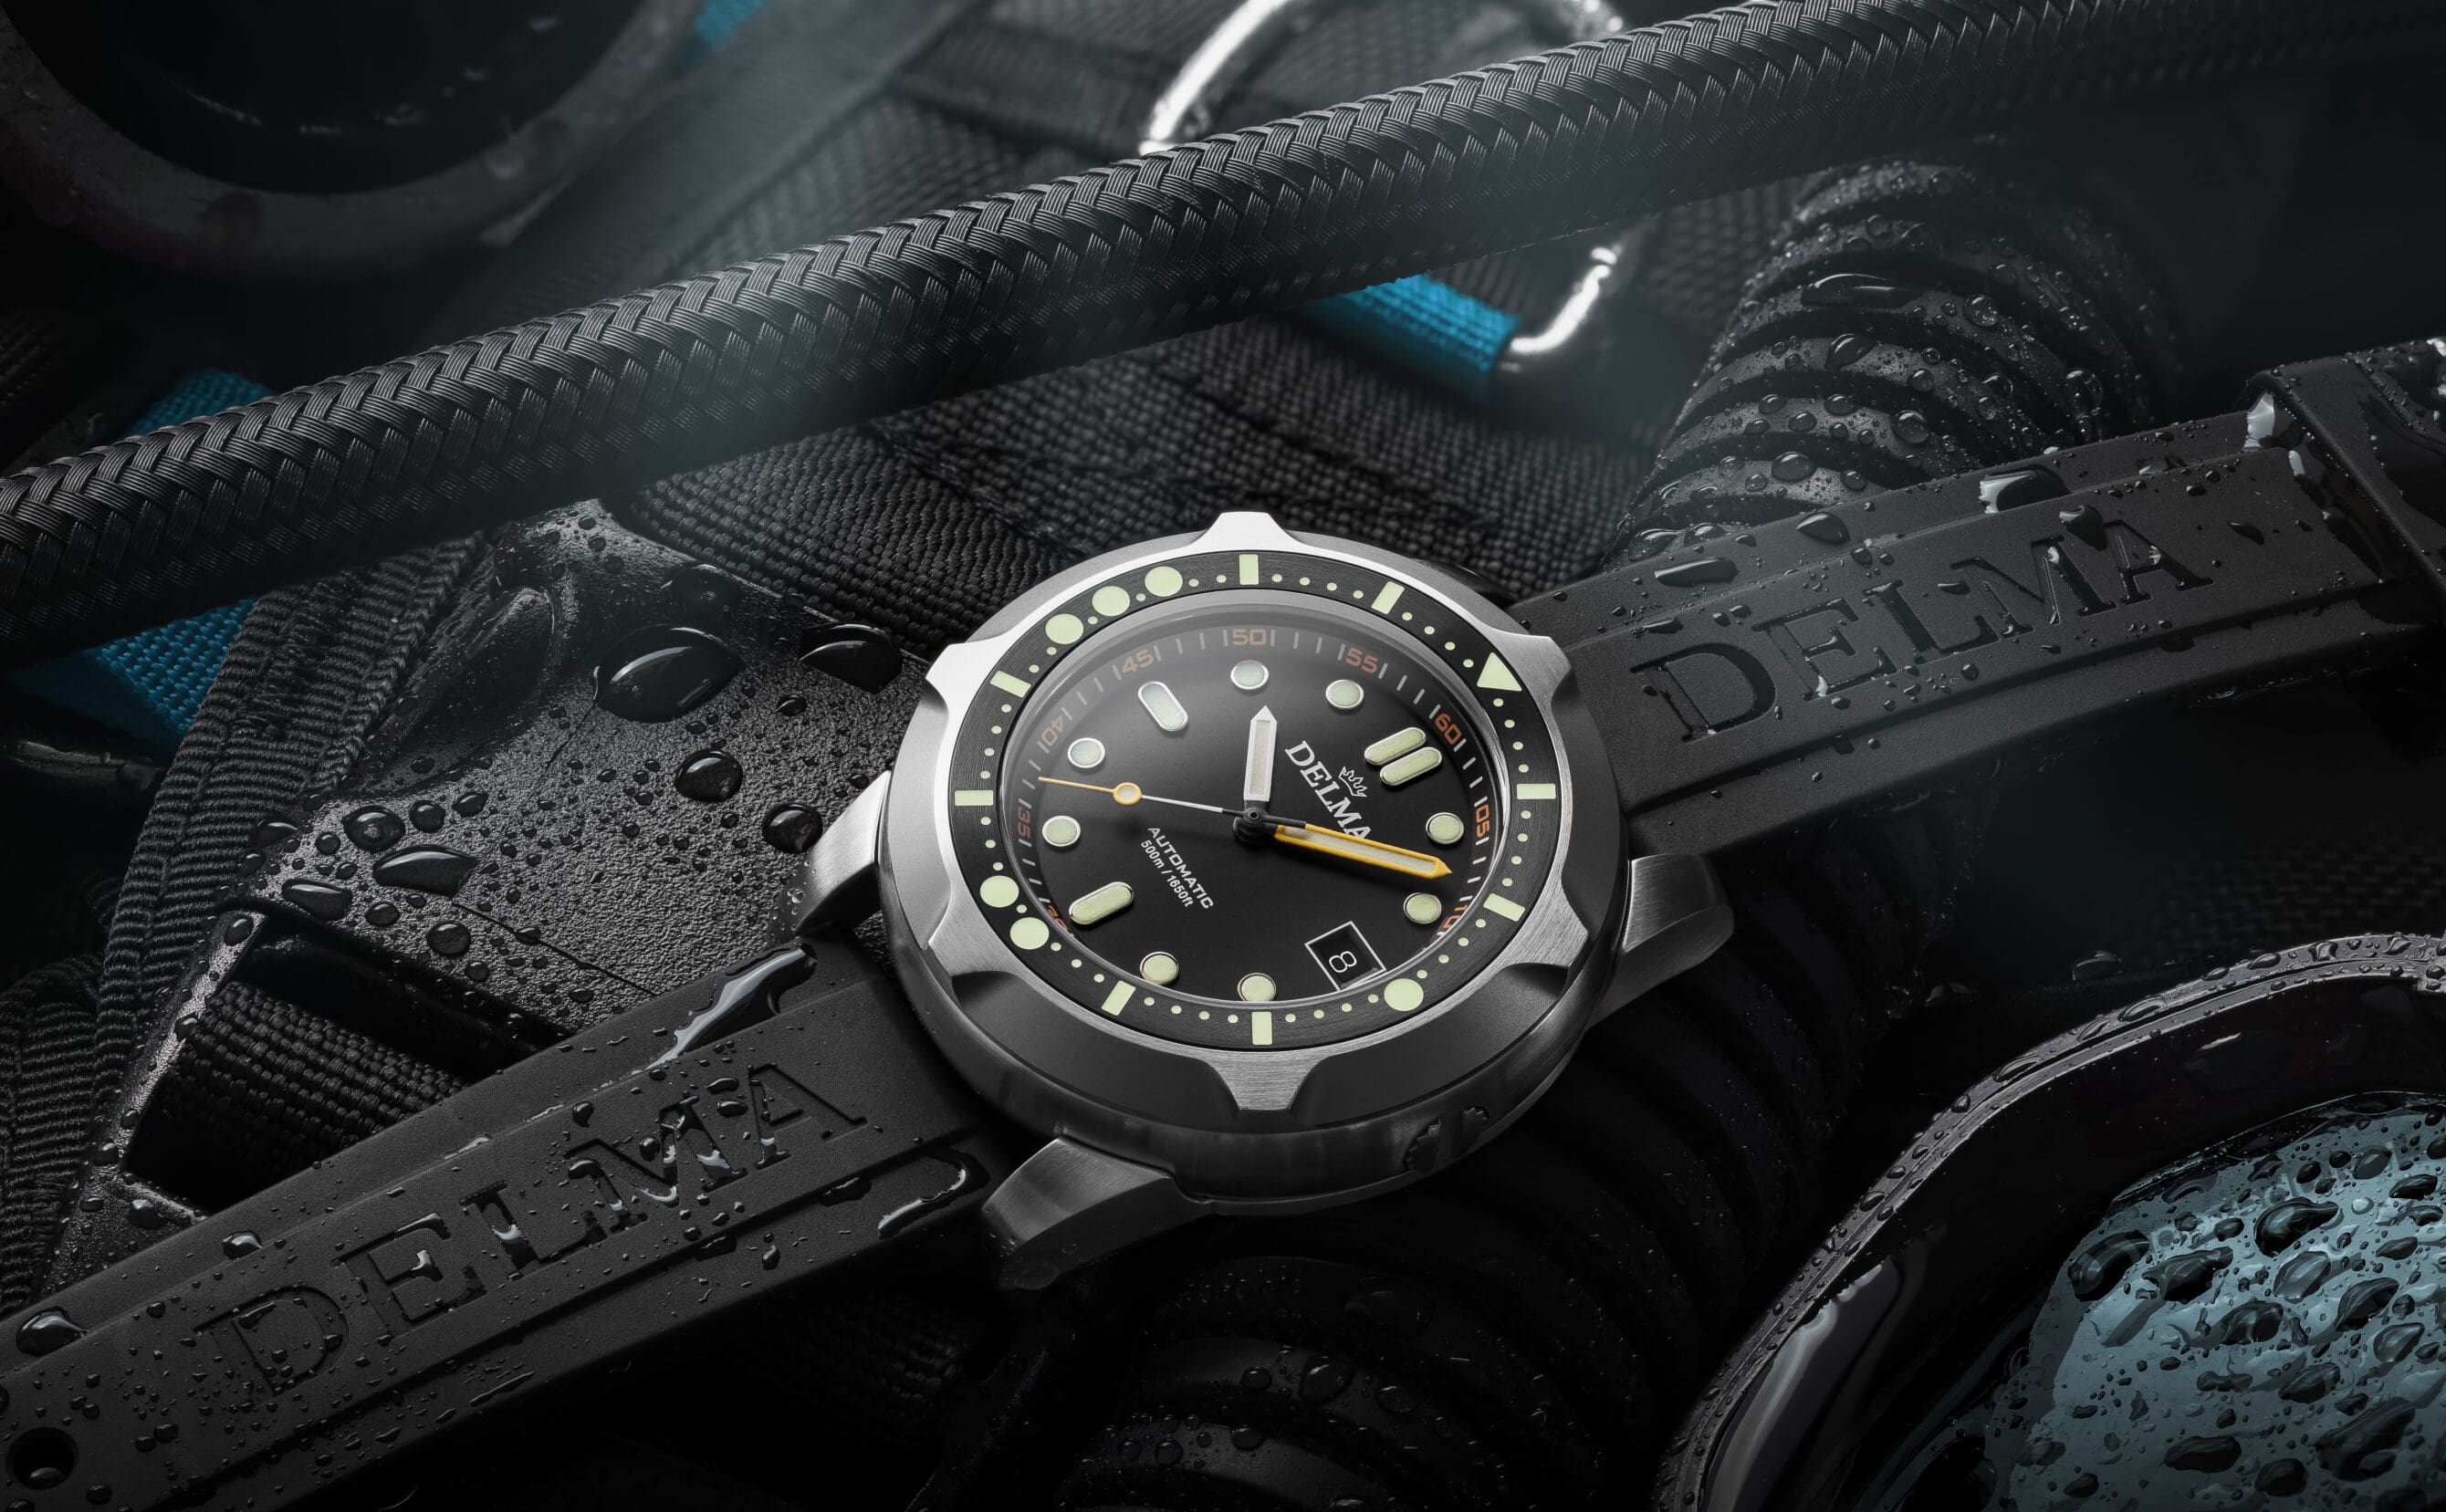 The Delma Quattro is a deep-dive special with plenty of reef cred